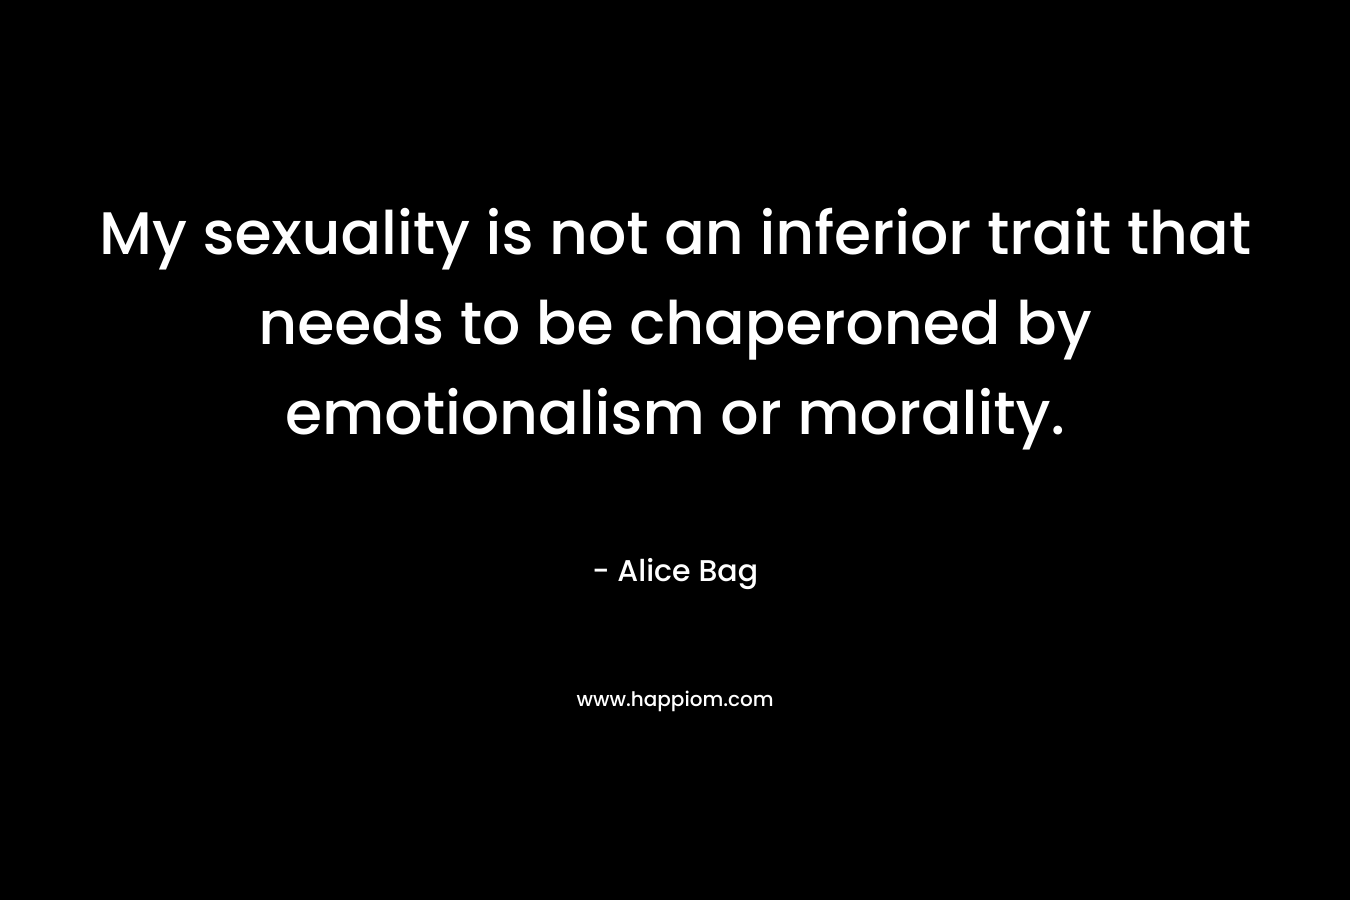 My sexuality is not an inferior trait that needs to be chaperoned by emotionalism or morality. – Alice Bag